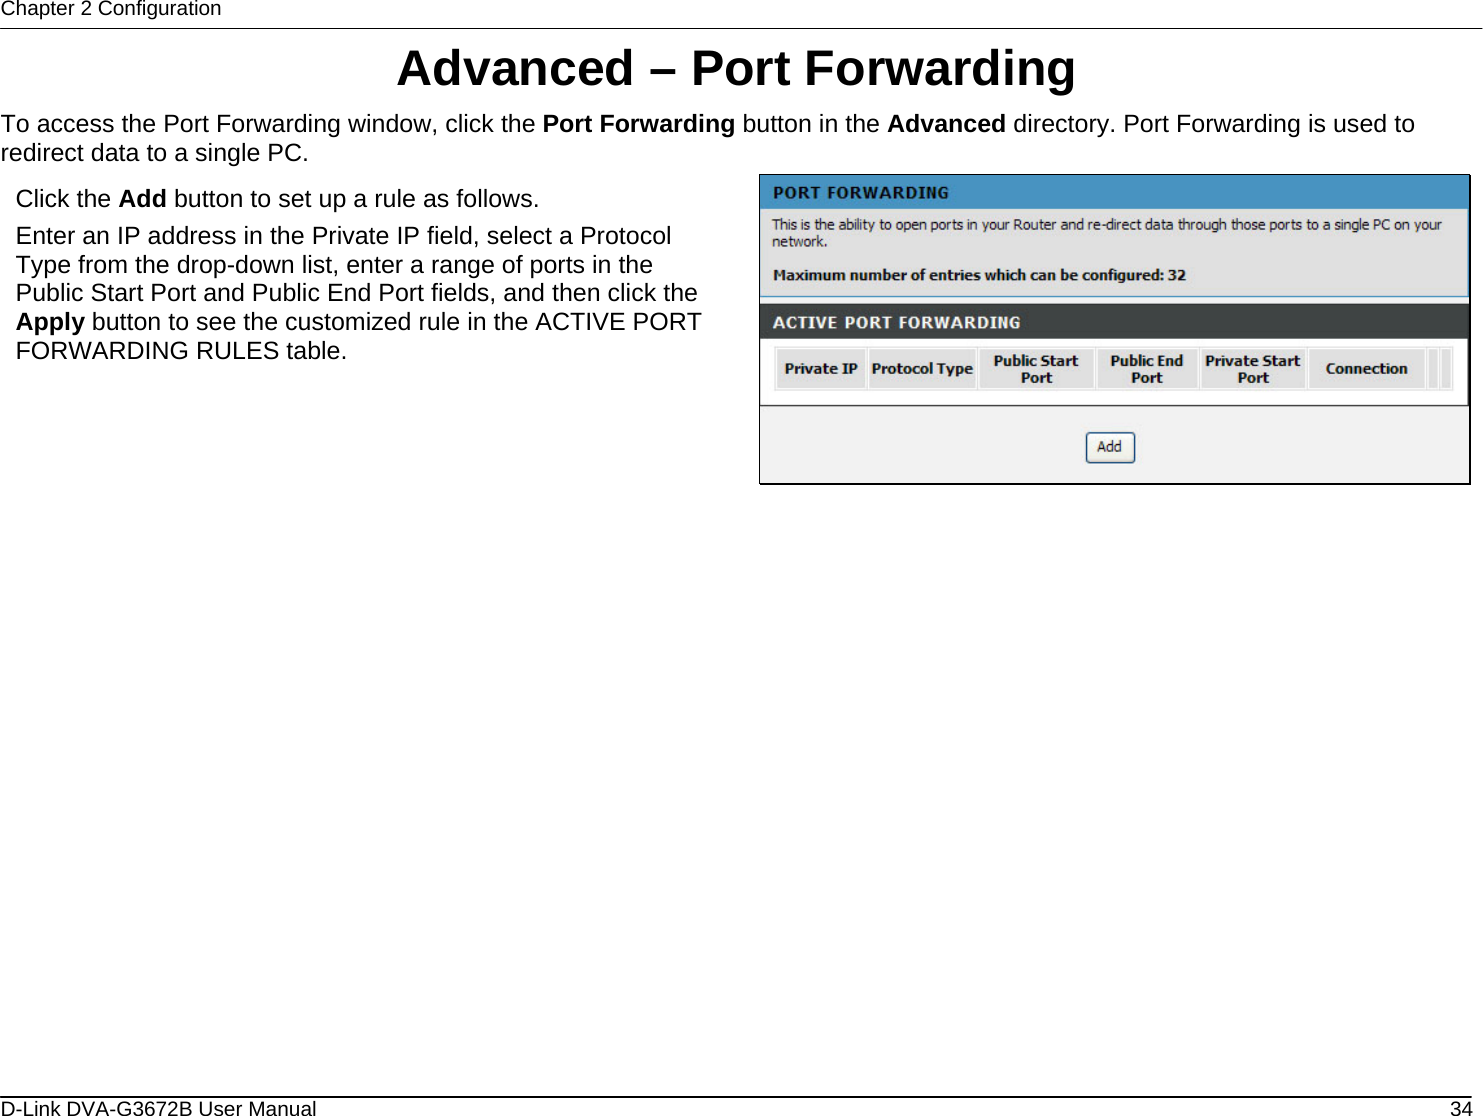 Chapter 2 Configuration Advanced – Port Forwarding To access the Port Forwarding window, click the Port Forwarding button in the Advanced directory. Port Forwarding is used to redirect data to a single PC.  Click the Add button to set up a rule as follows. Enter an IP address in the Private IP field, select a Protocol Type from the drop-down list, enter a range of ports in the Public Start Port and Public End Port fields, and then click the Apply button to see the customized rule in the ACTIVE PORT FORWARDING RULES table.                      D-Link DVA-G3672B User Manual  34